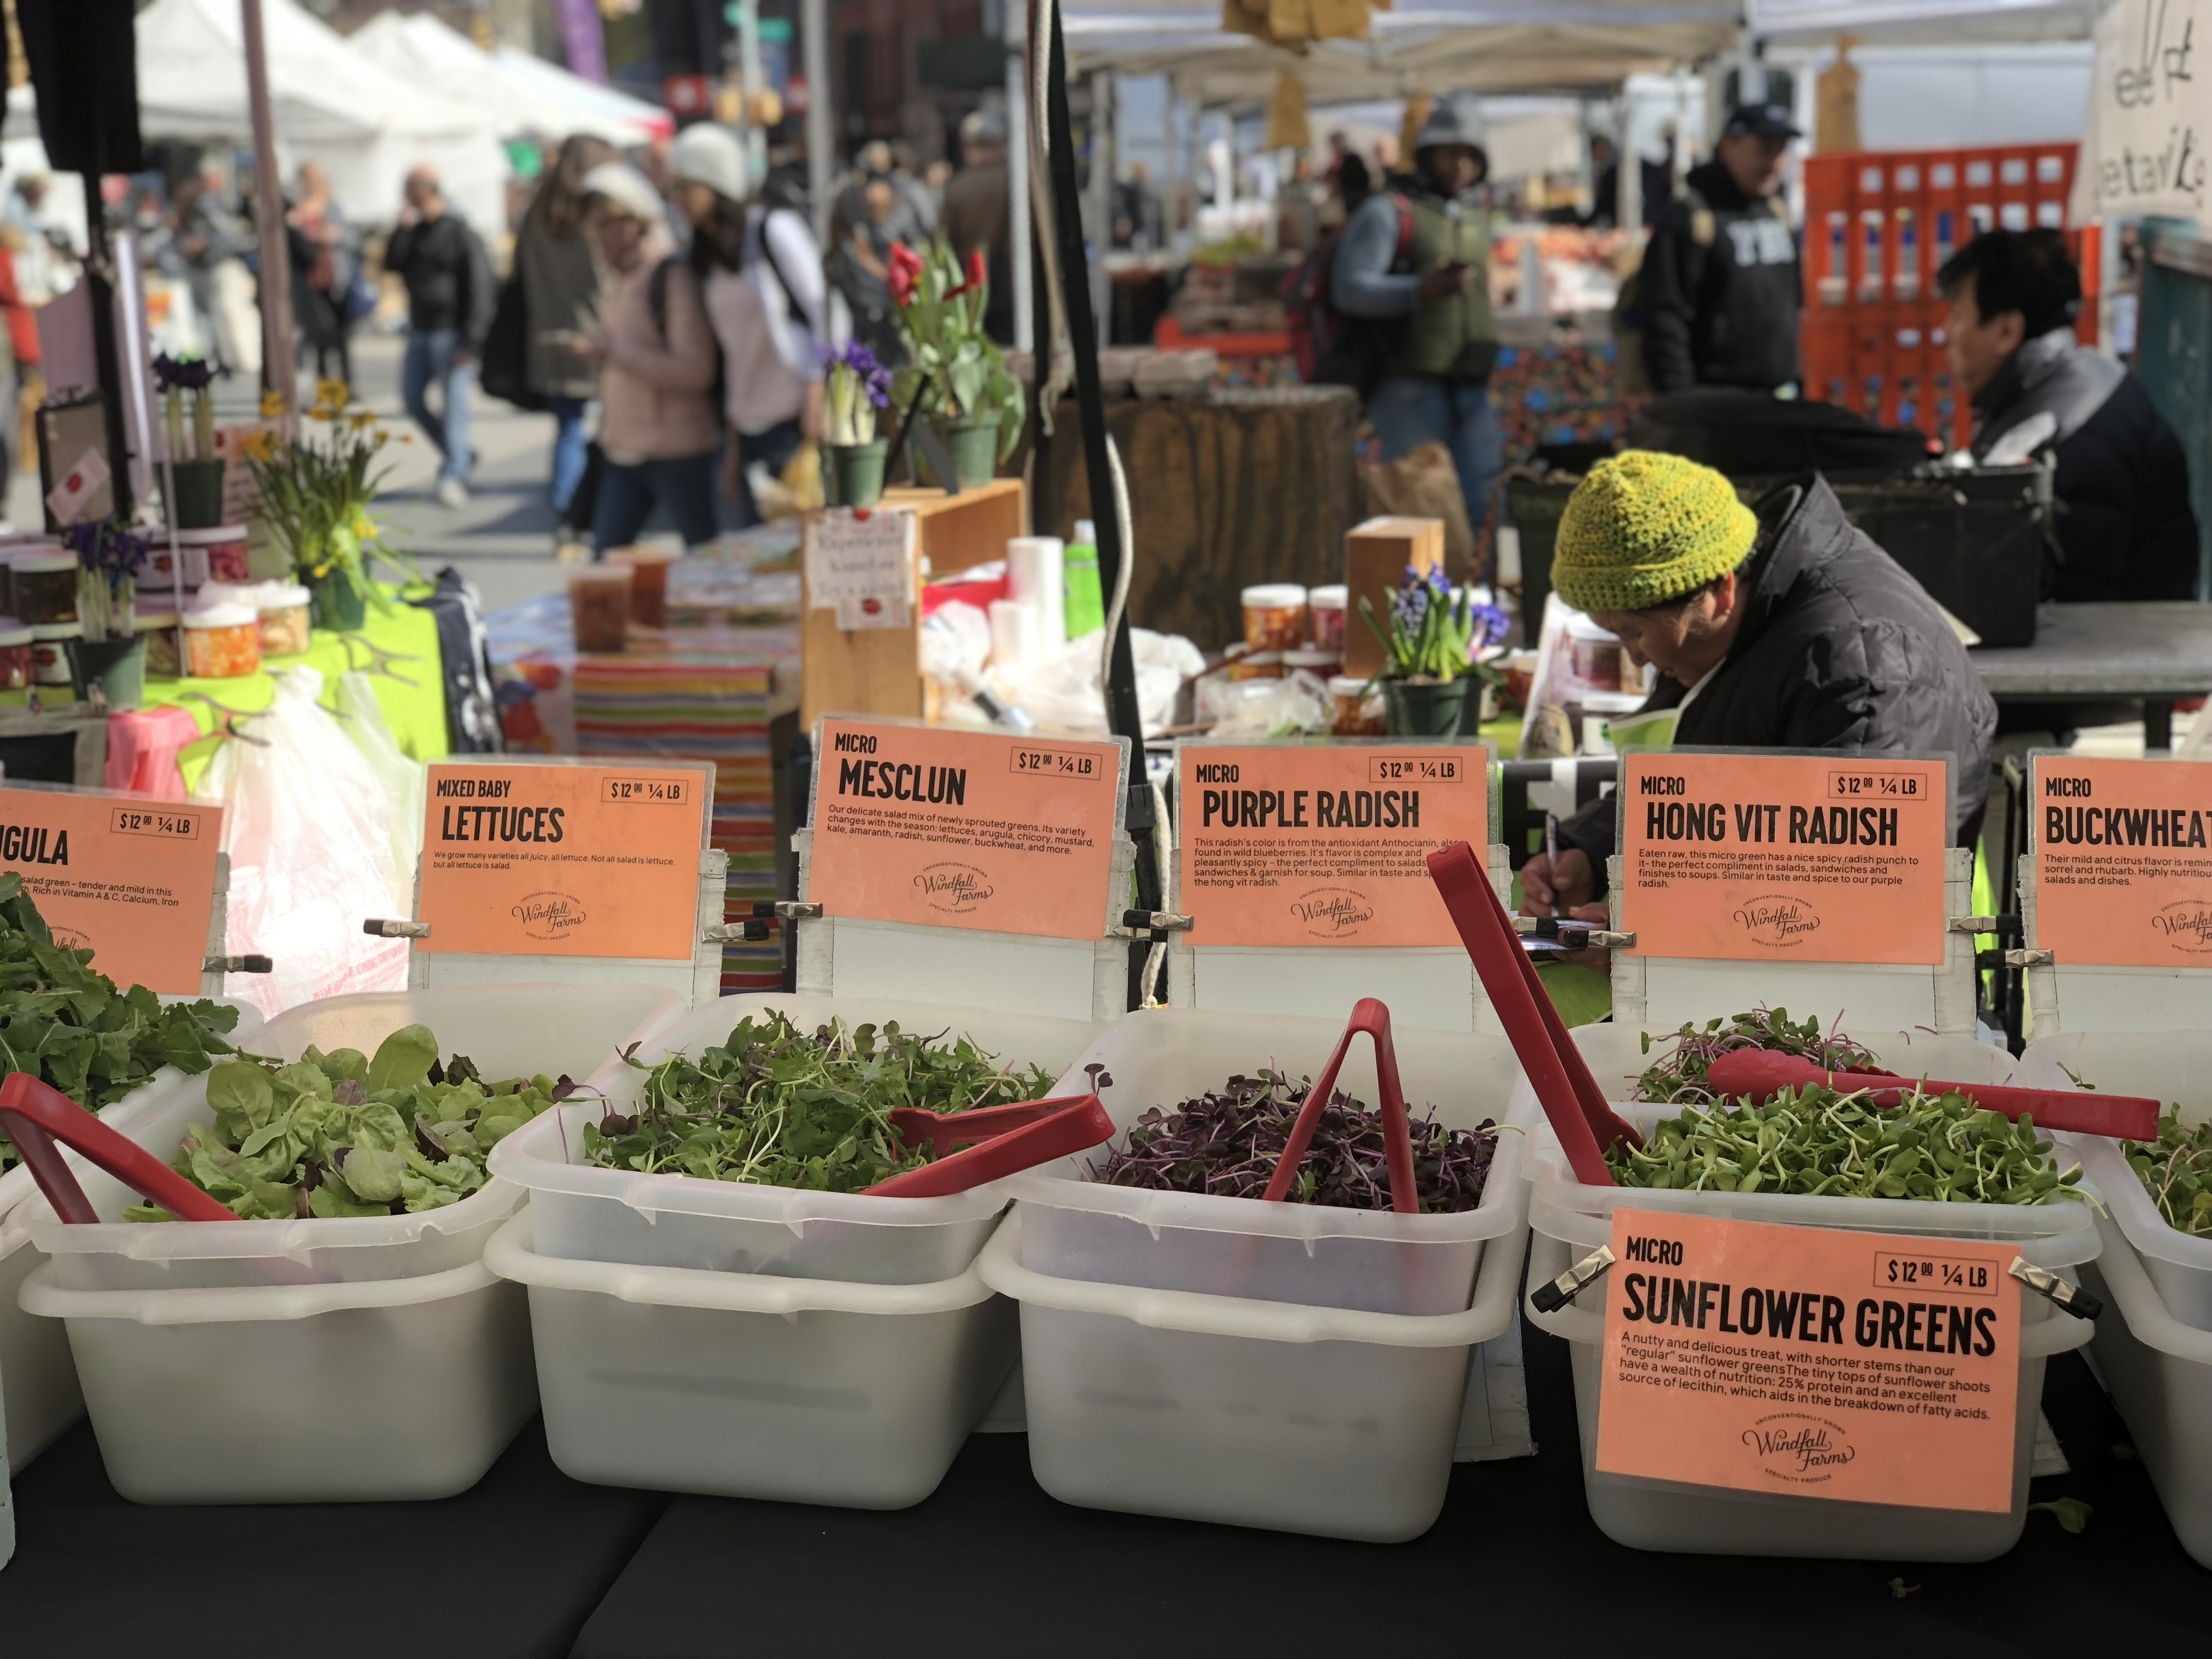 Windfall Farms' stand at the Union Square Greenmarket